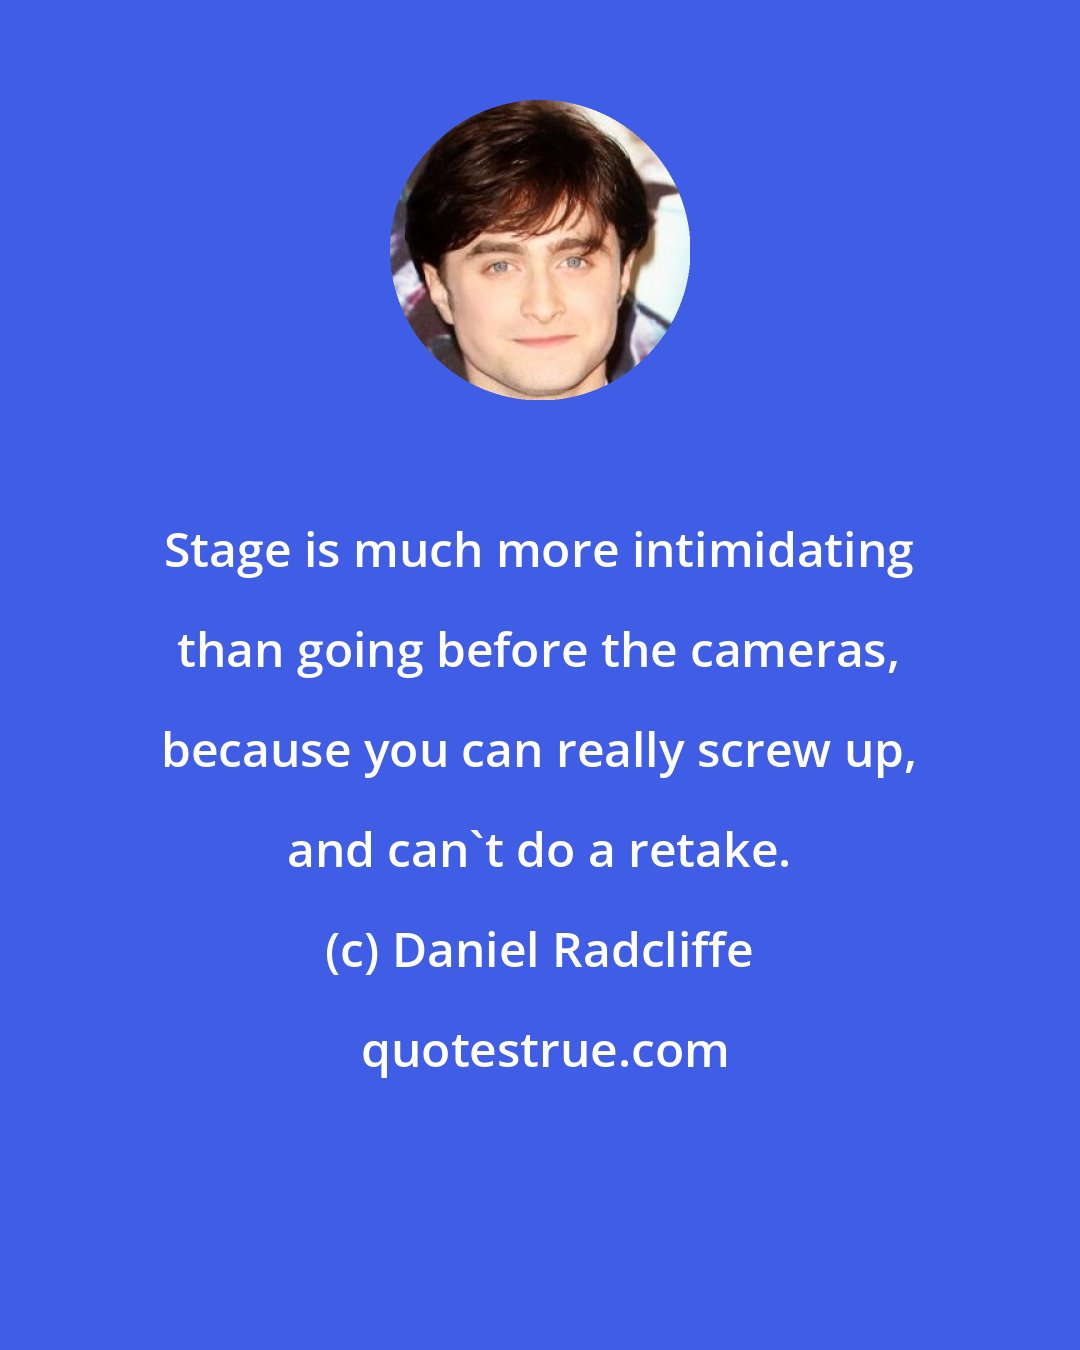 Daniel Radcliffe: Stage is much more intimidating than going before the cameras, because you can really screw up, and can't do a retake.